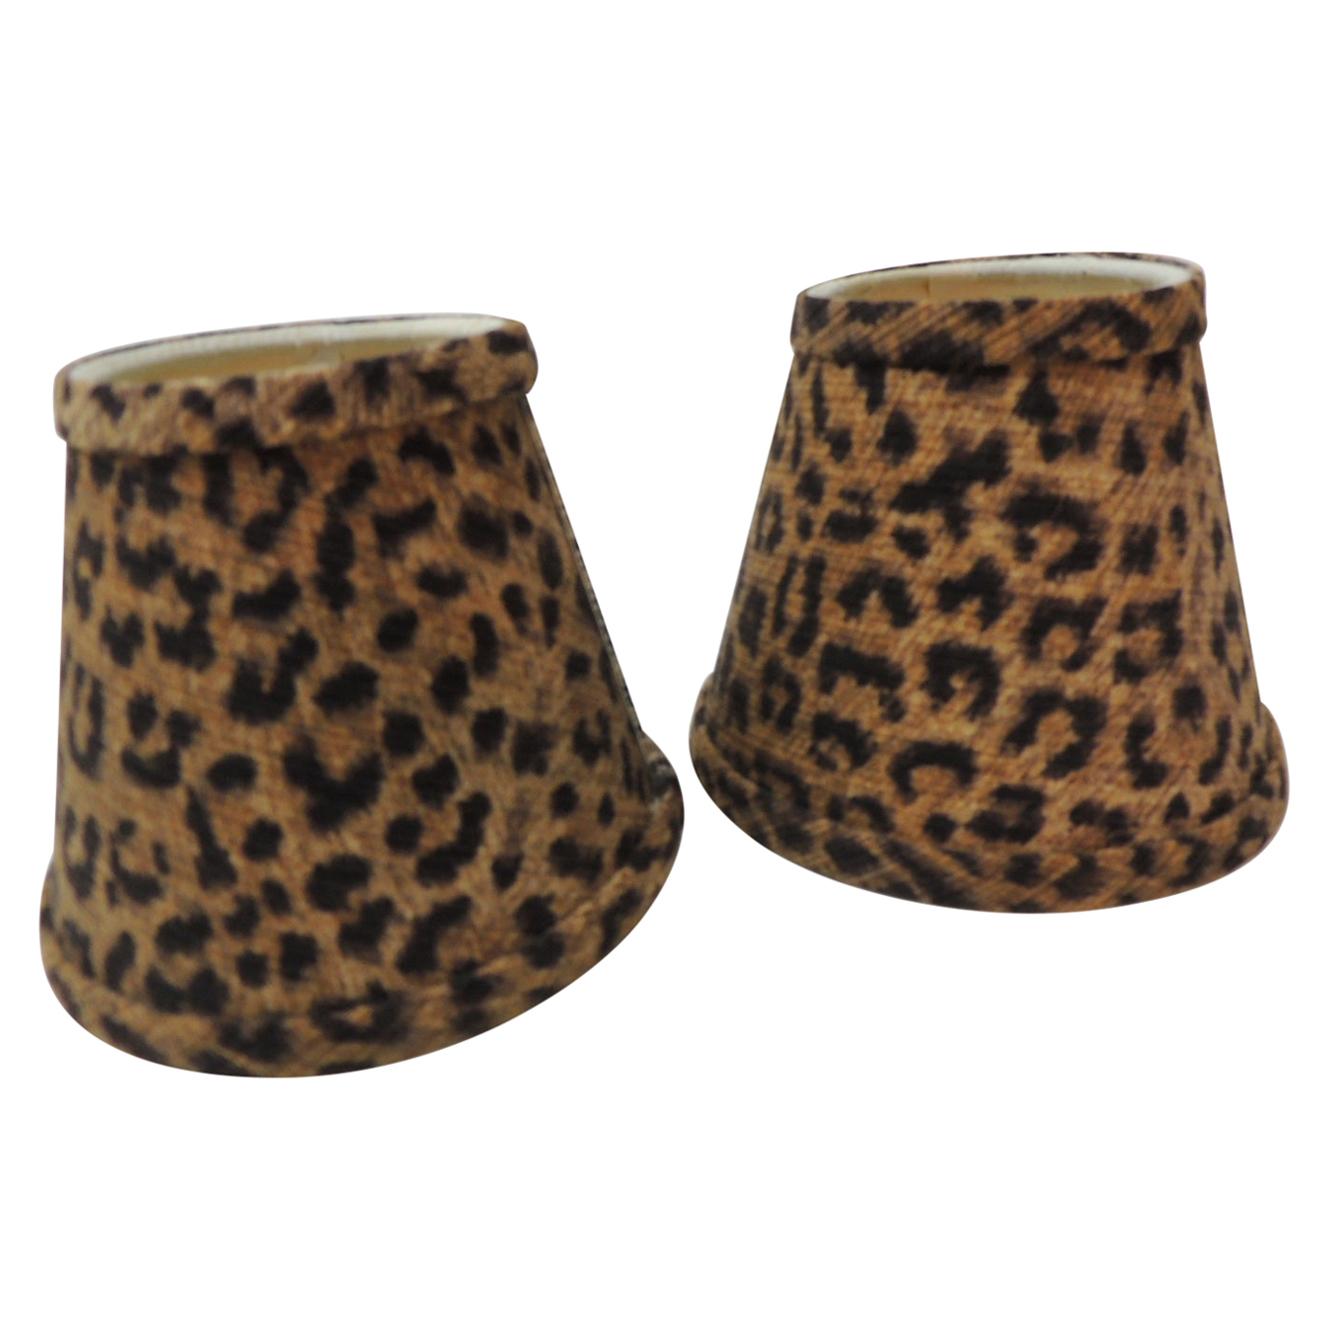 Set of Two Small Candelabras Leopards Cotton Fabric Woven Lamp Shades